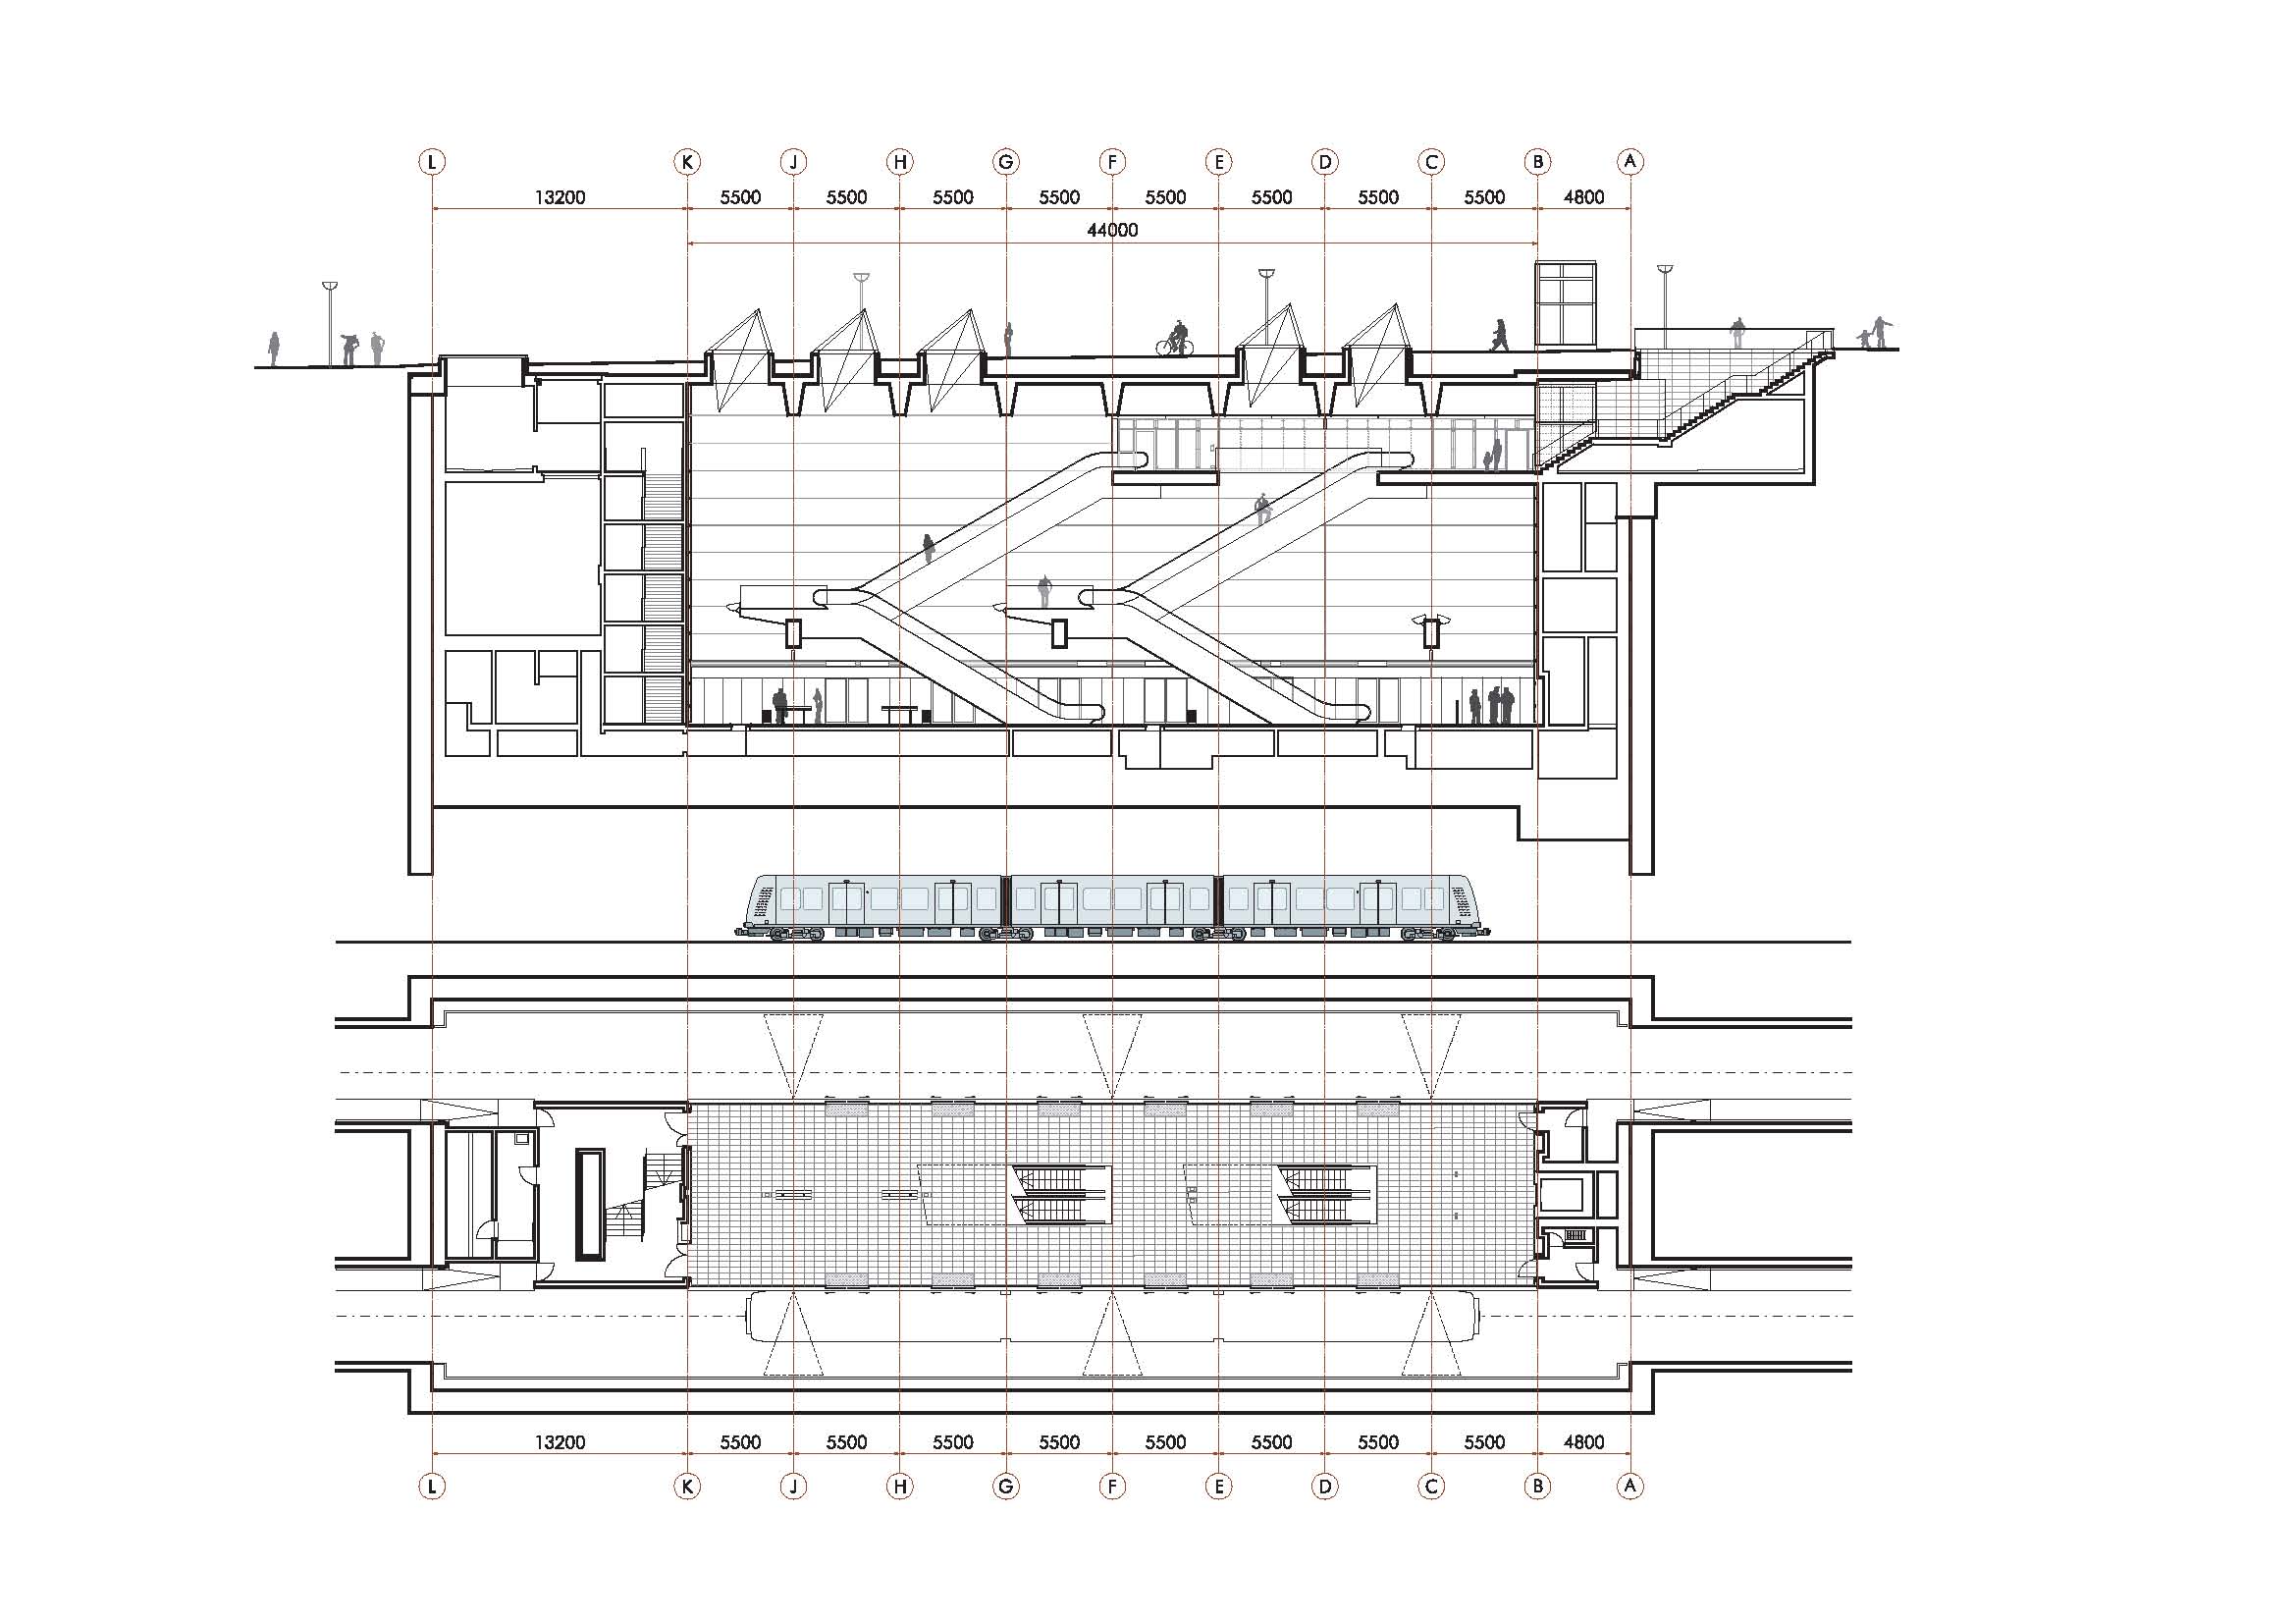 Elevation of Kongens Nytorv Staition at top with train for scale and plan of platform at the bottom.